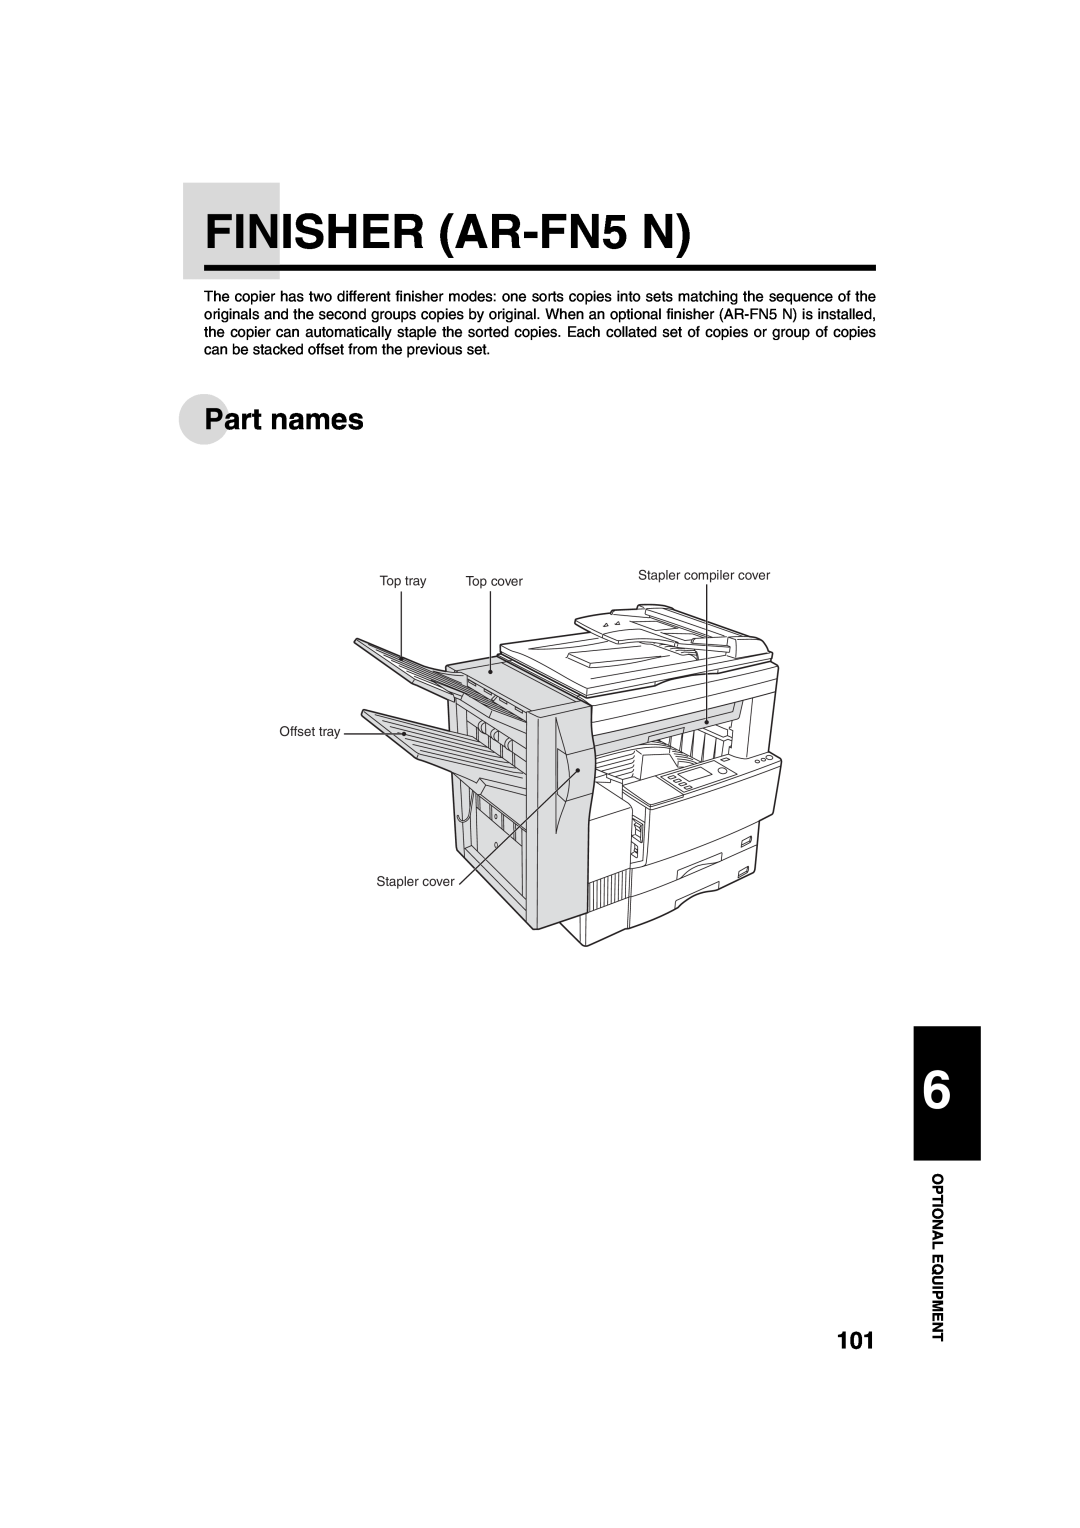 Sharp AR-M208 operation manual FINISHER AR-FN5 N, Part names 